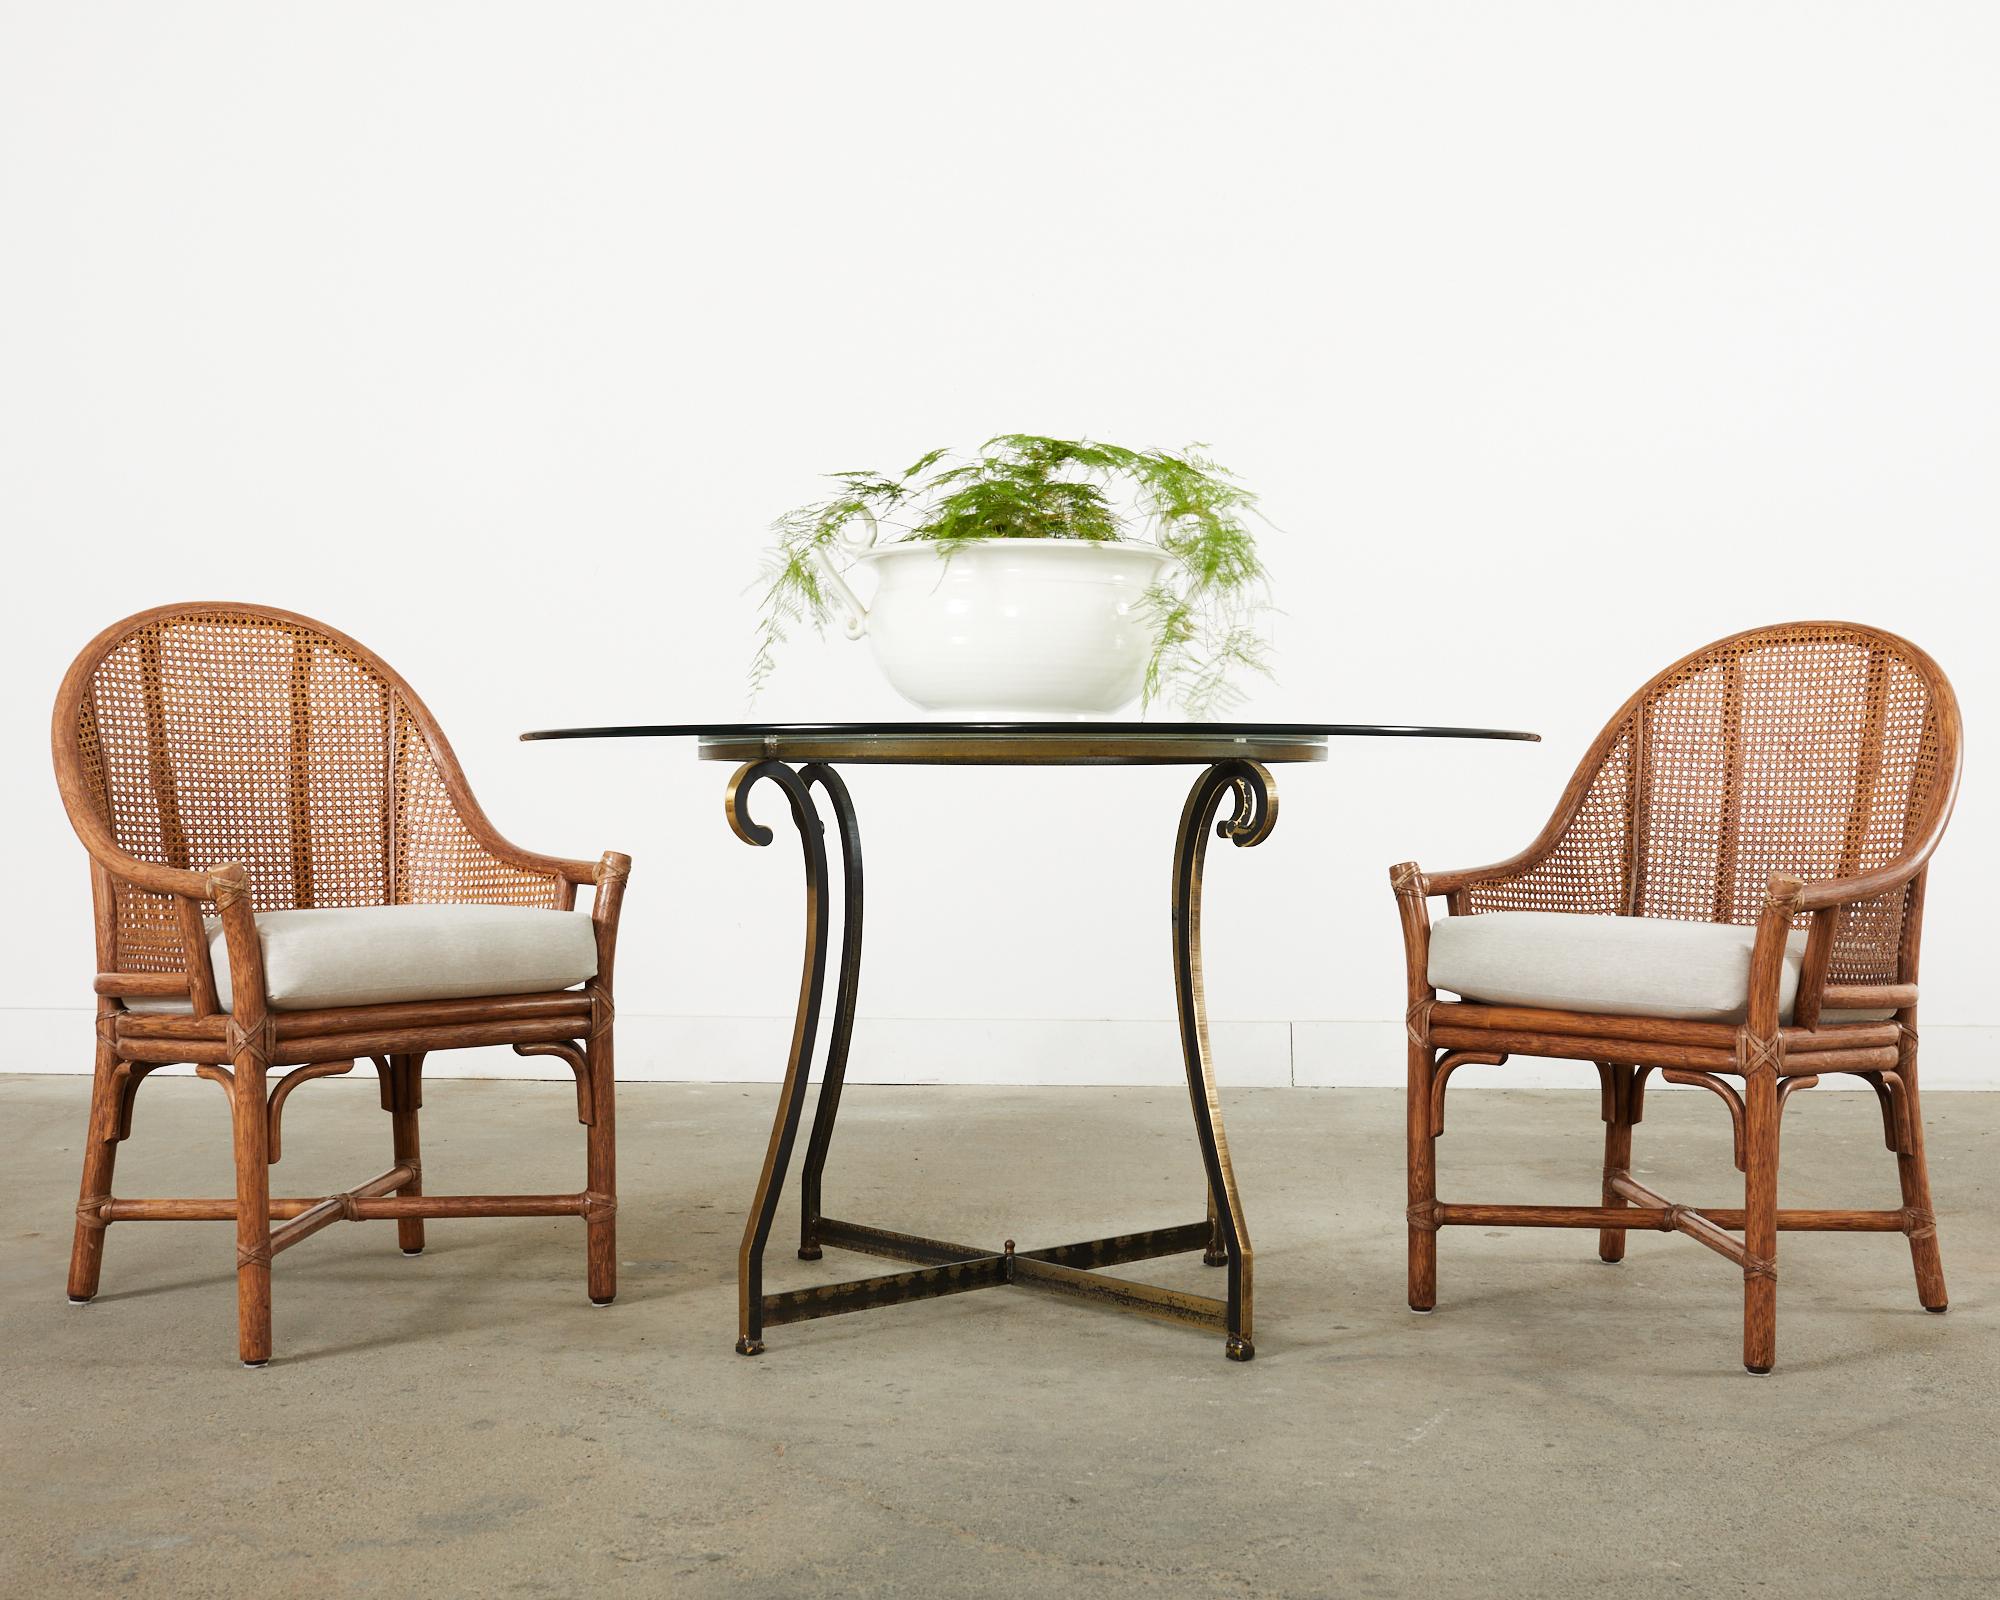 Gorgeous set of eight McGuire dining chairs known as Belden chairs. Made in the California coastal organic modern style featuring thick pole rattan frames with a barrel back form inset with honeycomb cane on the back and sides. The gracefully back